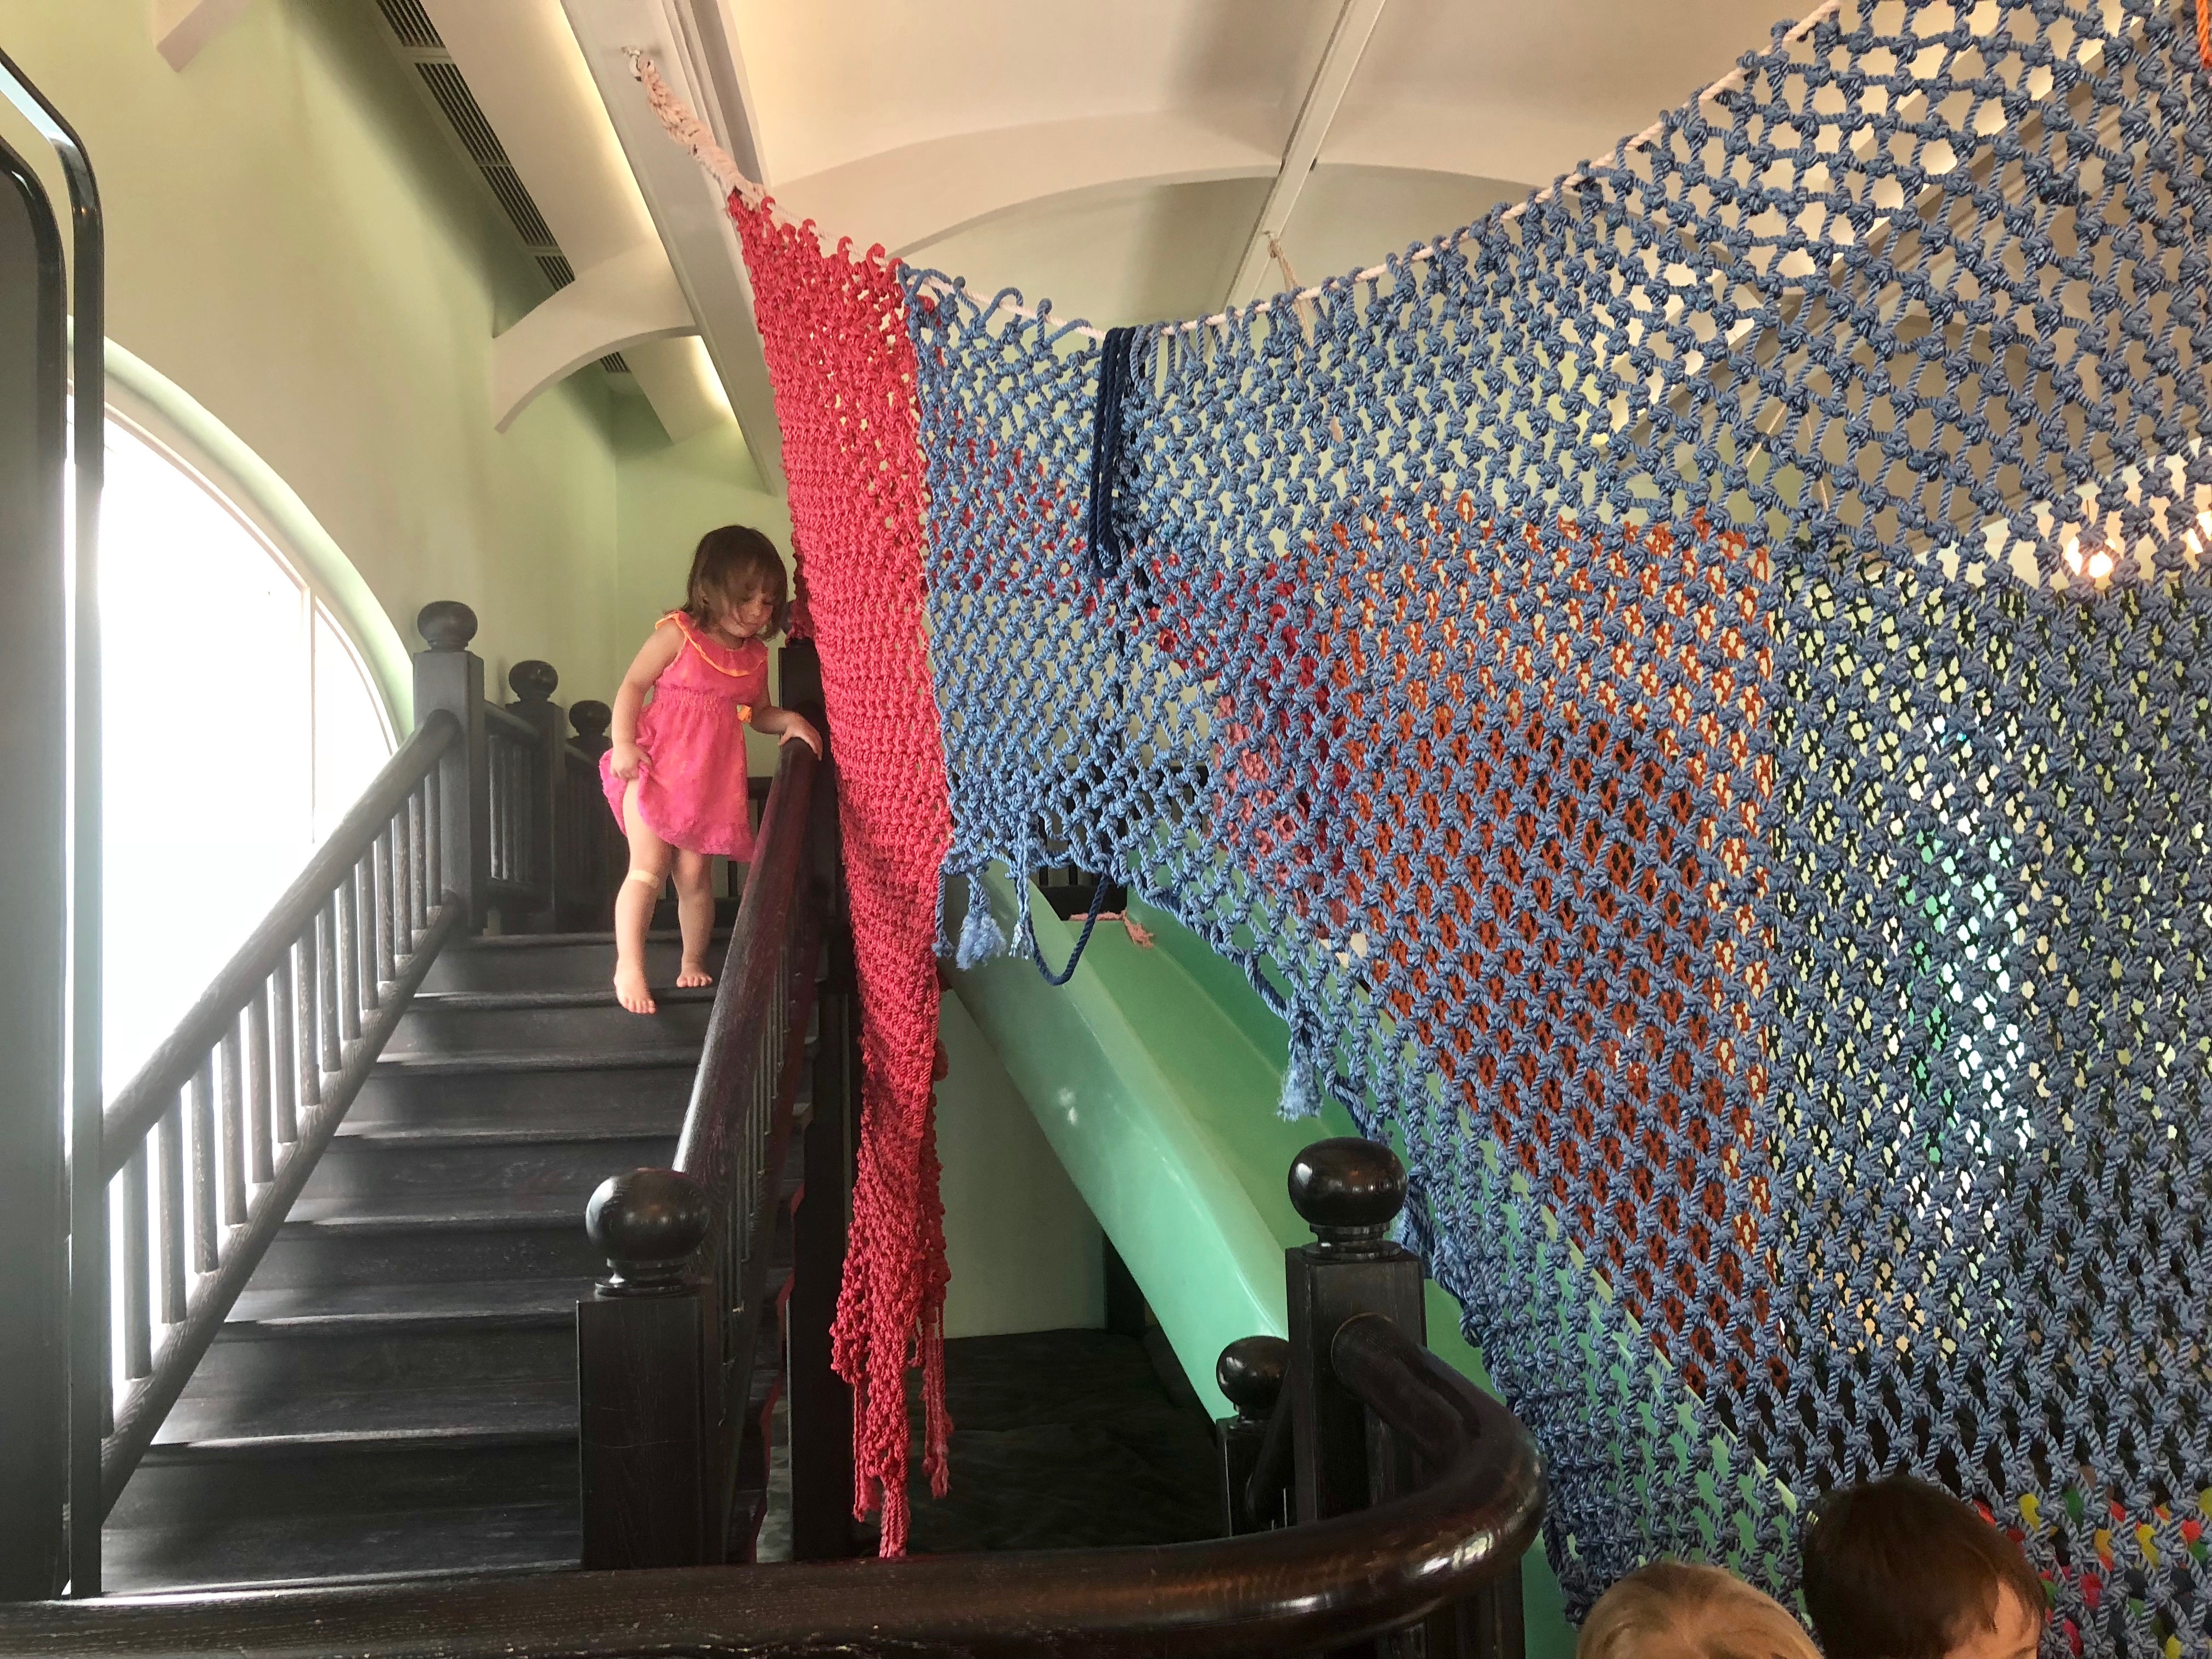 a girl climbing up a staircase with a net